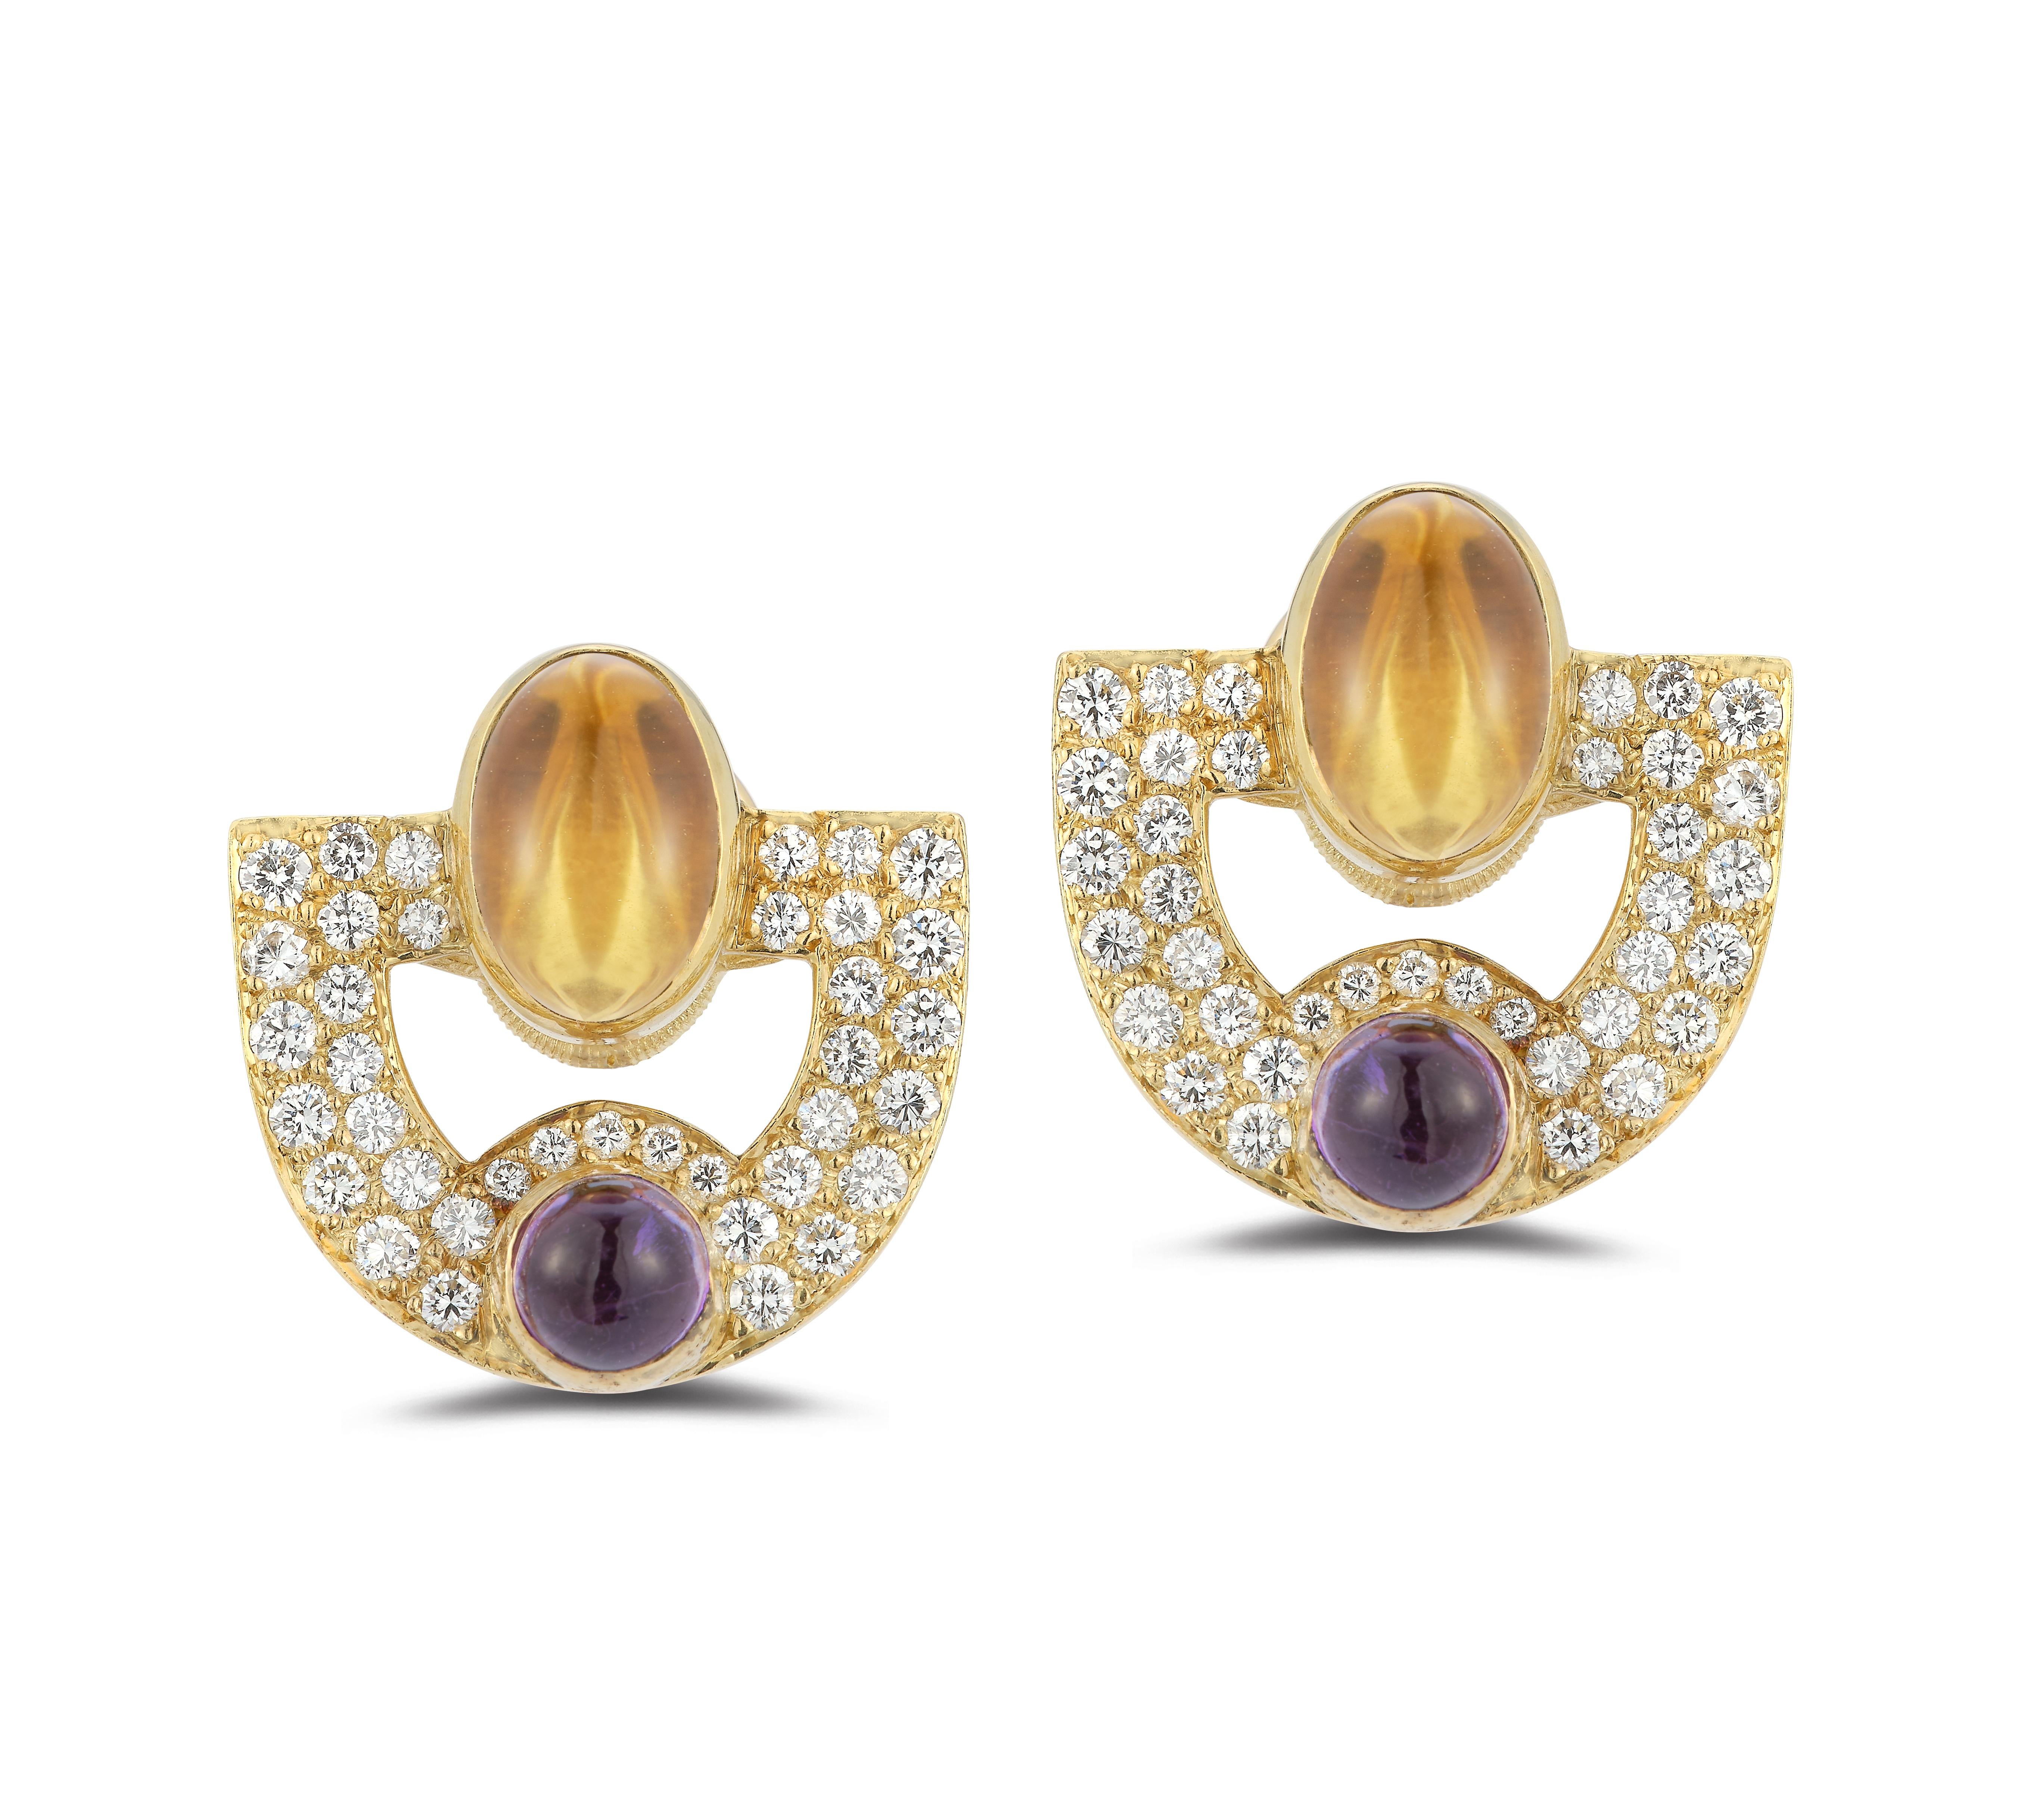 Citrine & Amethyst Earrings,

Yellow gold clip on earrings each set with round brilliant cut diamonds, a cabochon citrine, and a cabochon amethyst

Diamond total approximate weight: 3.47ct

Citrine approximate weight: 6.72ct

Amethyst approximate